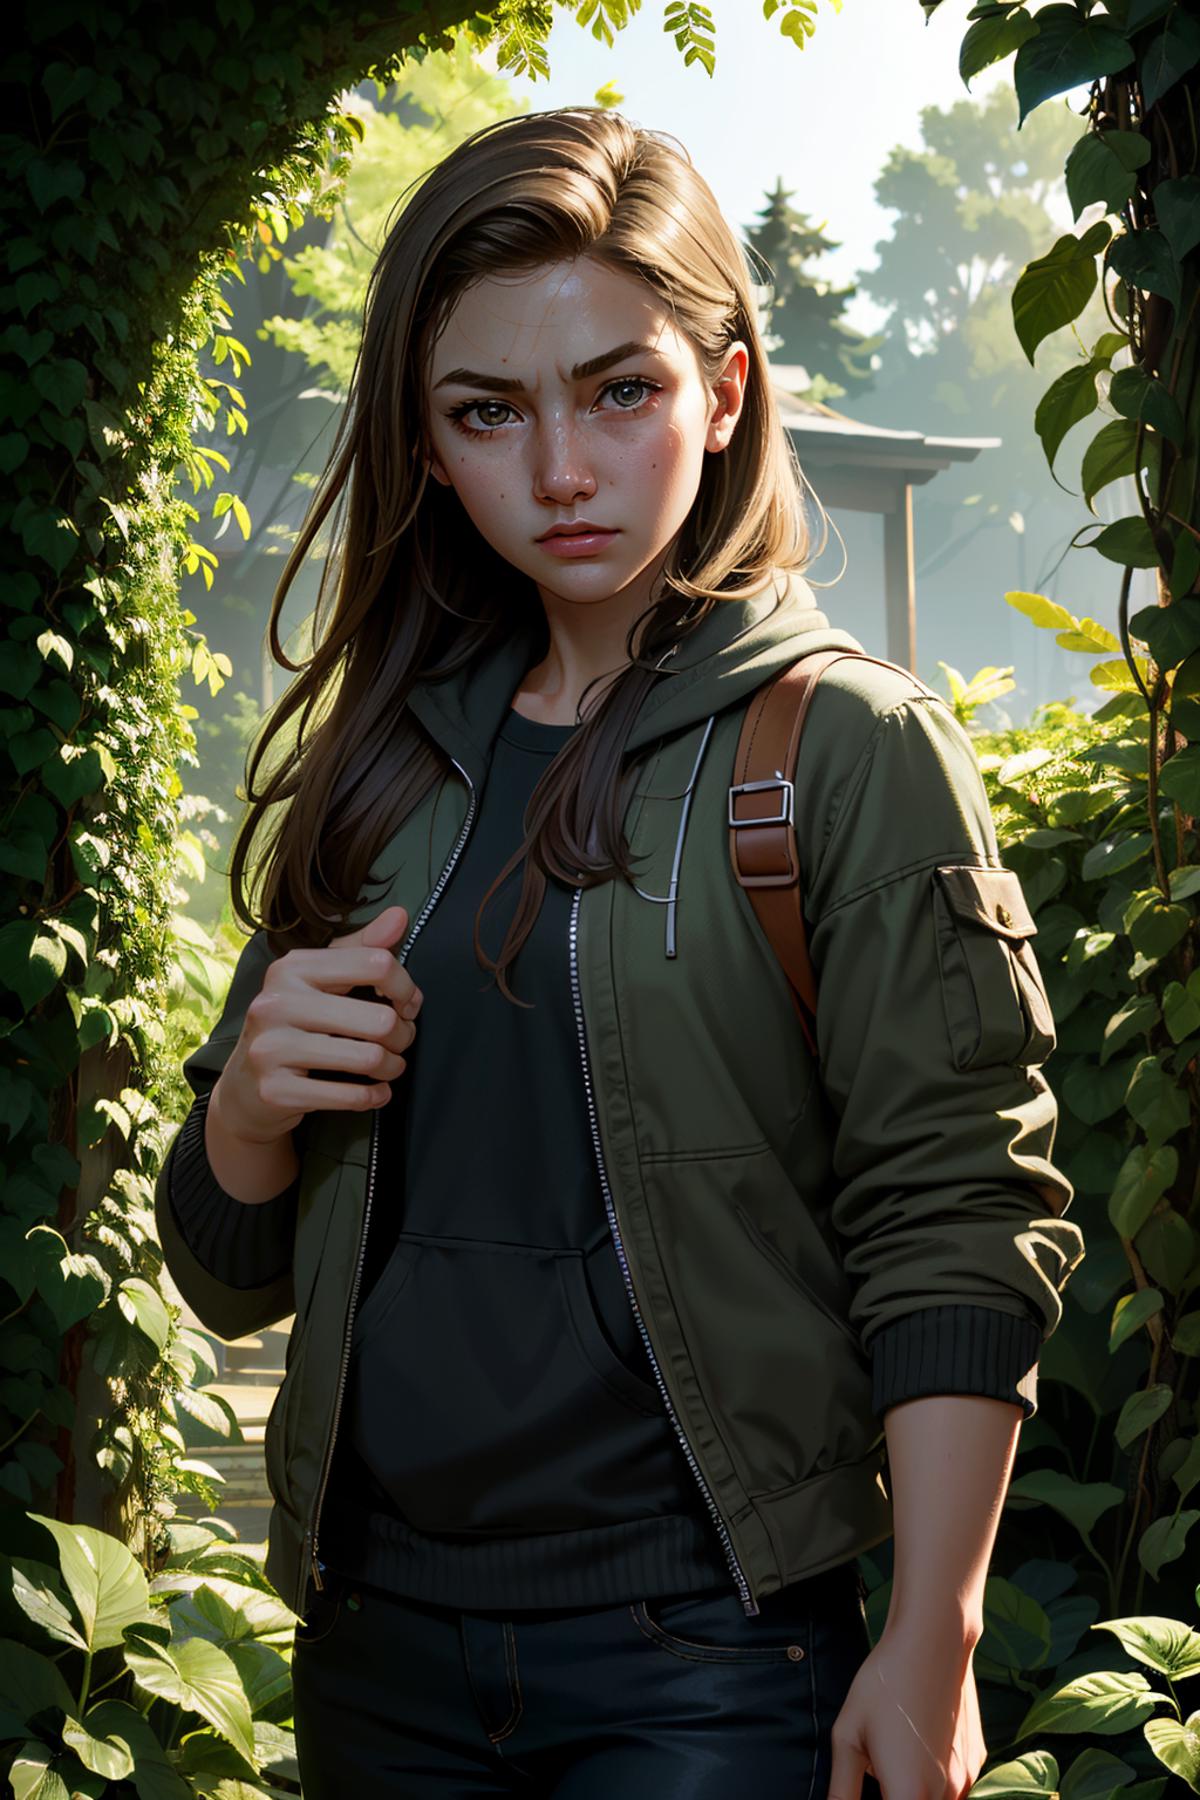 Abby from The Last of Us 2 image by BloodRedKittie